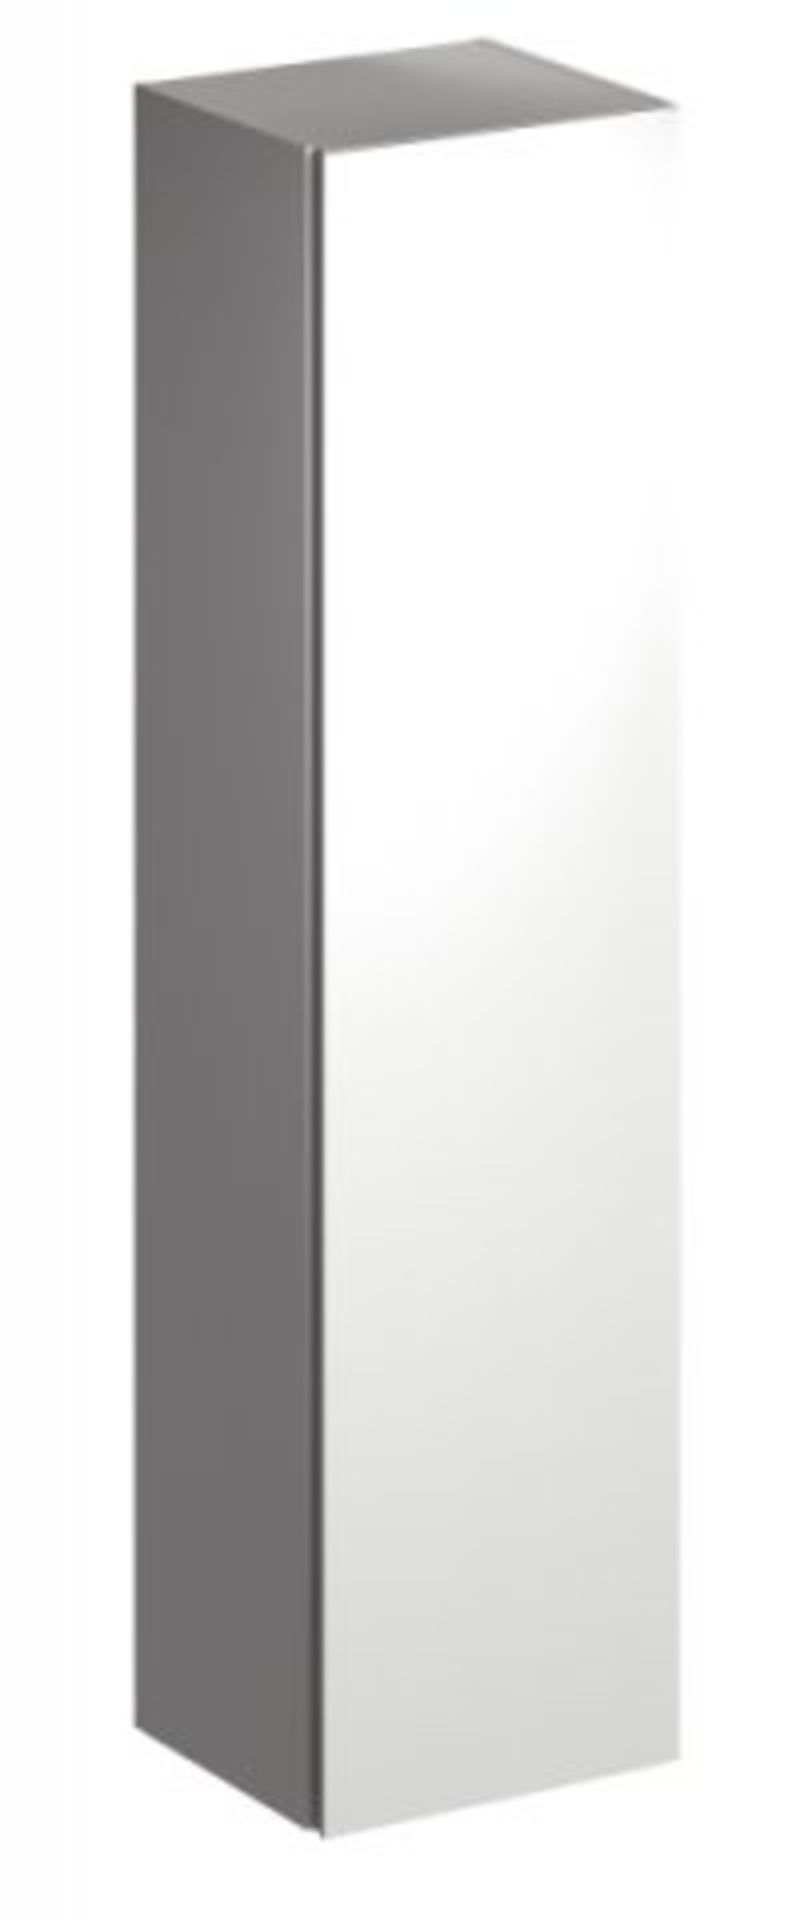 (PC40) Keramag 1700mm Xeno Tall Storage cabinet. RRP £998.99. 400x1700x351mm, white, high-glo...( - Image 2 of 4